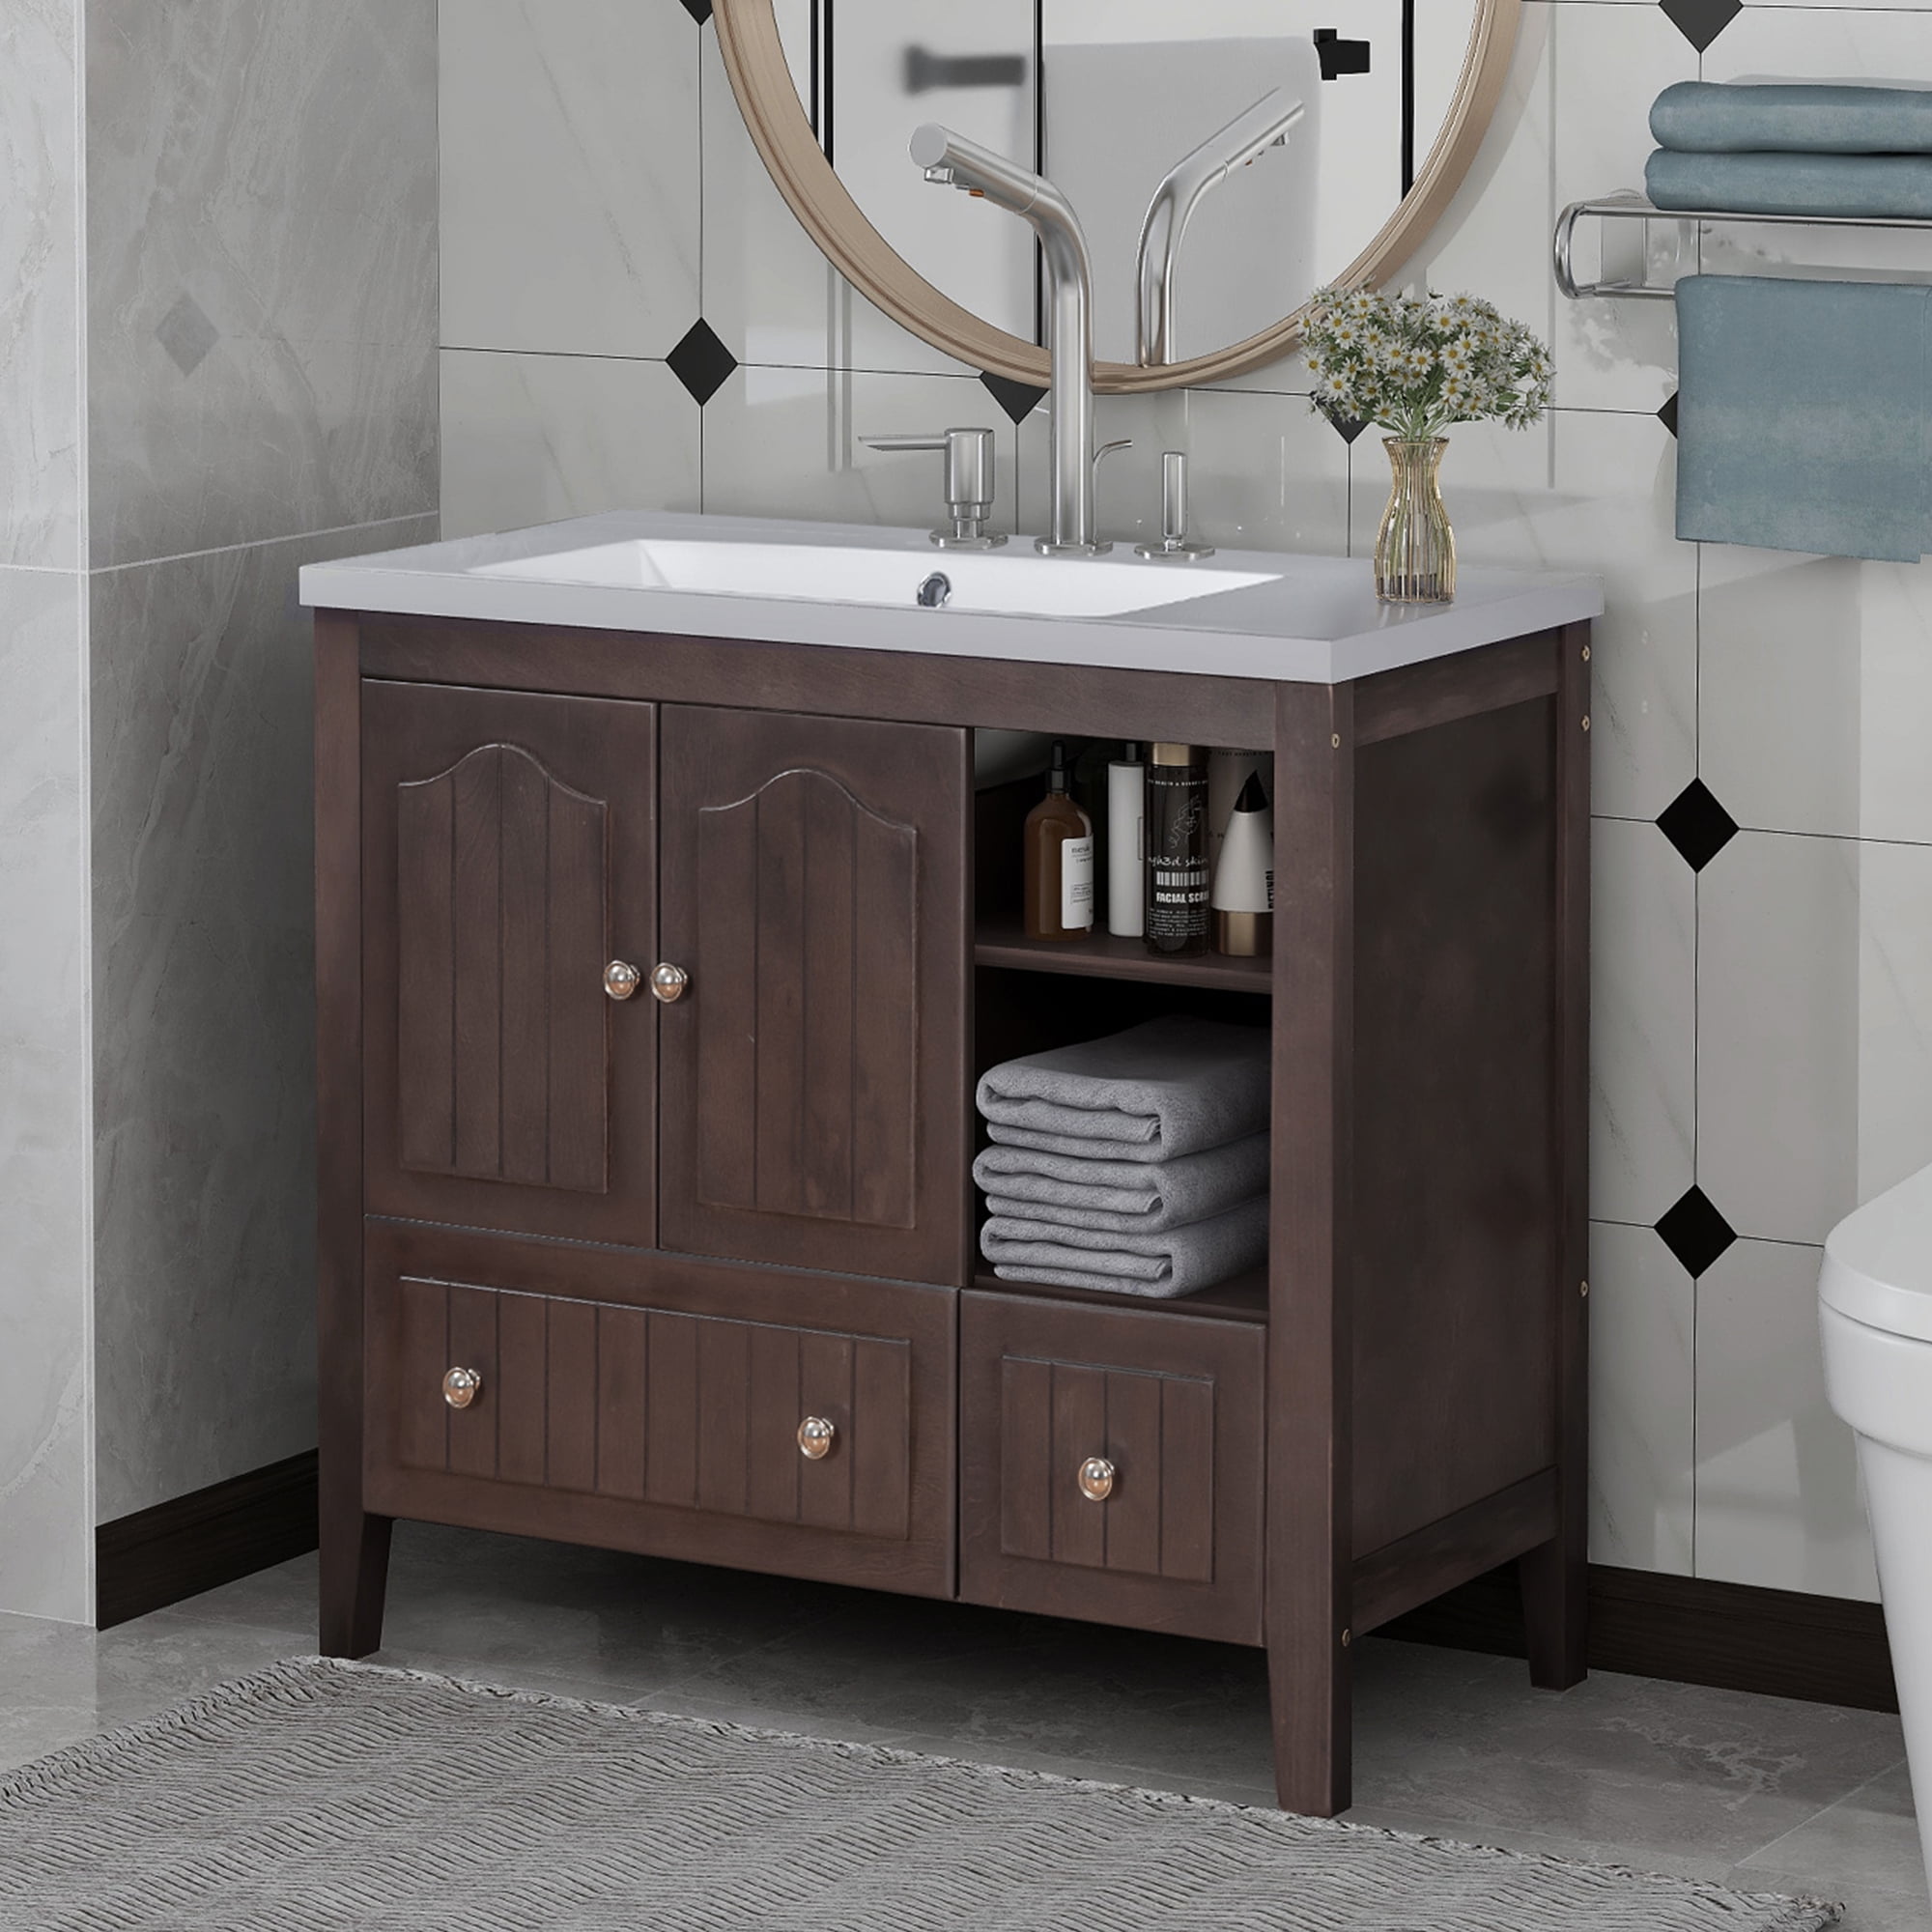 churanty 36" bathroom vanity with ceramic basin, bathroom storage cabinet  with two doors and drawers, solid frame, metal handles, brown